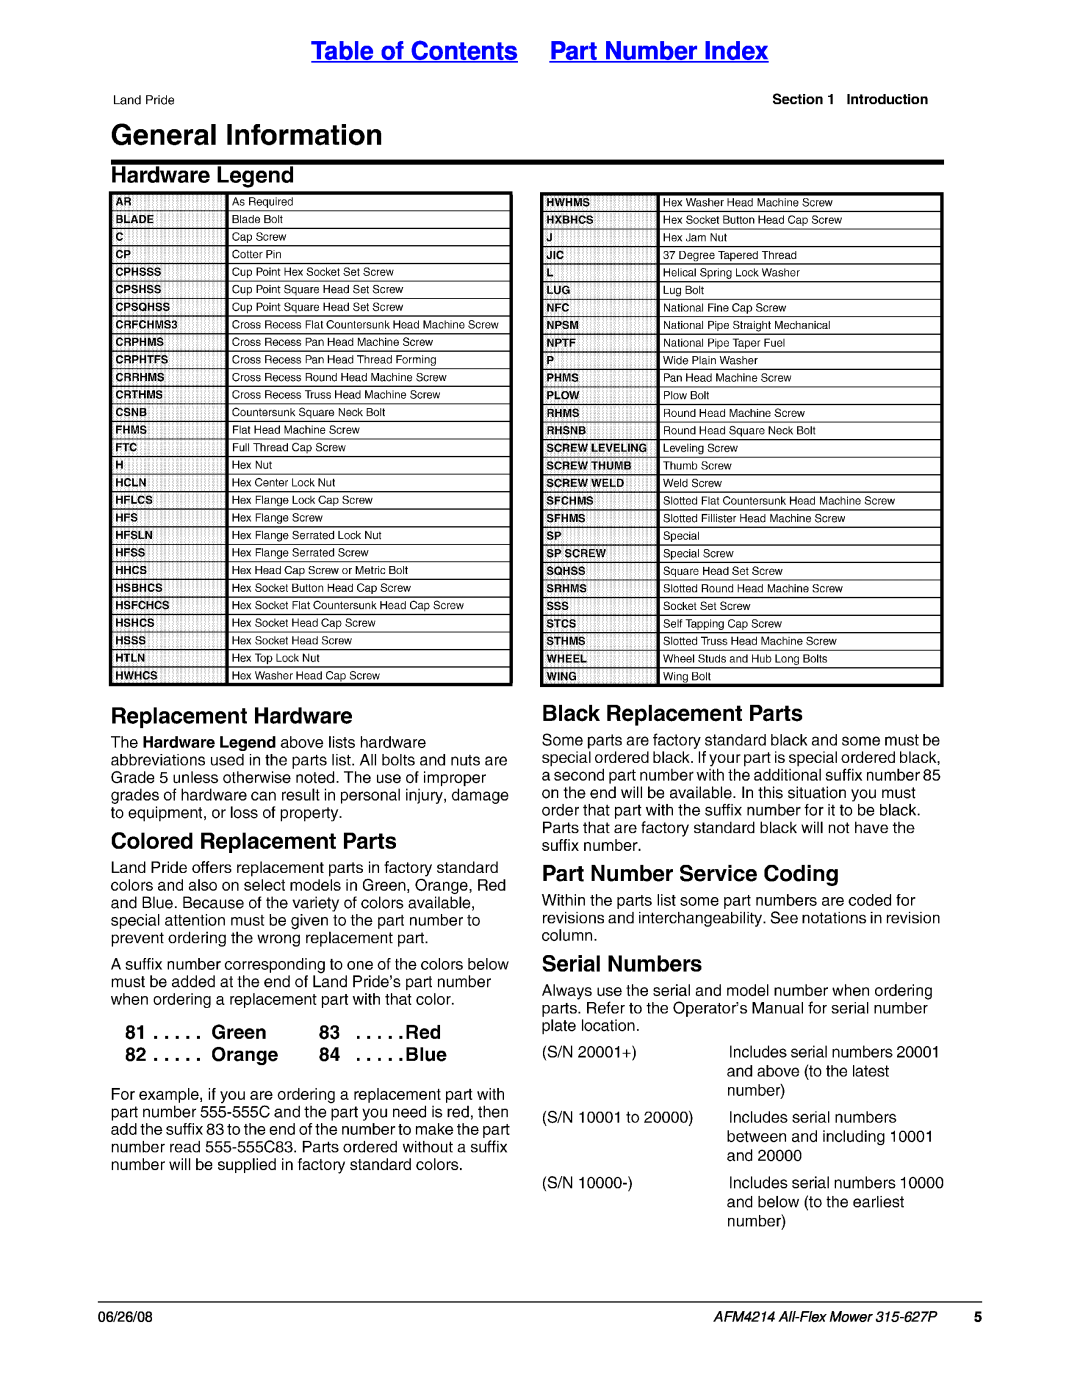 Land Pride manual Table of Contents Part Number Index, AFM4214 All-FlexMower 315-627P, 06/26/08 